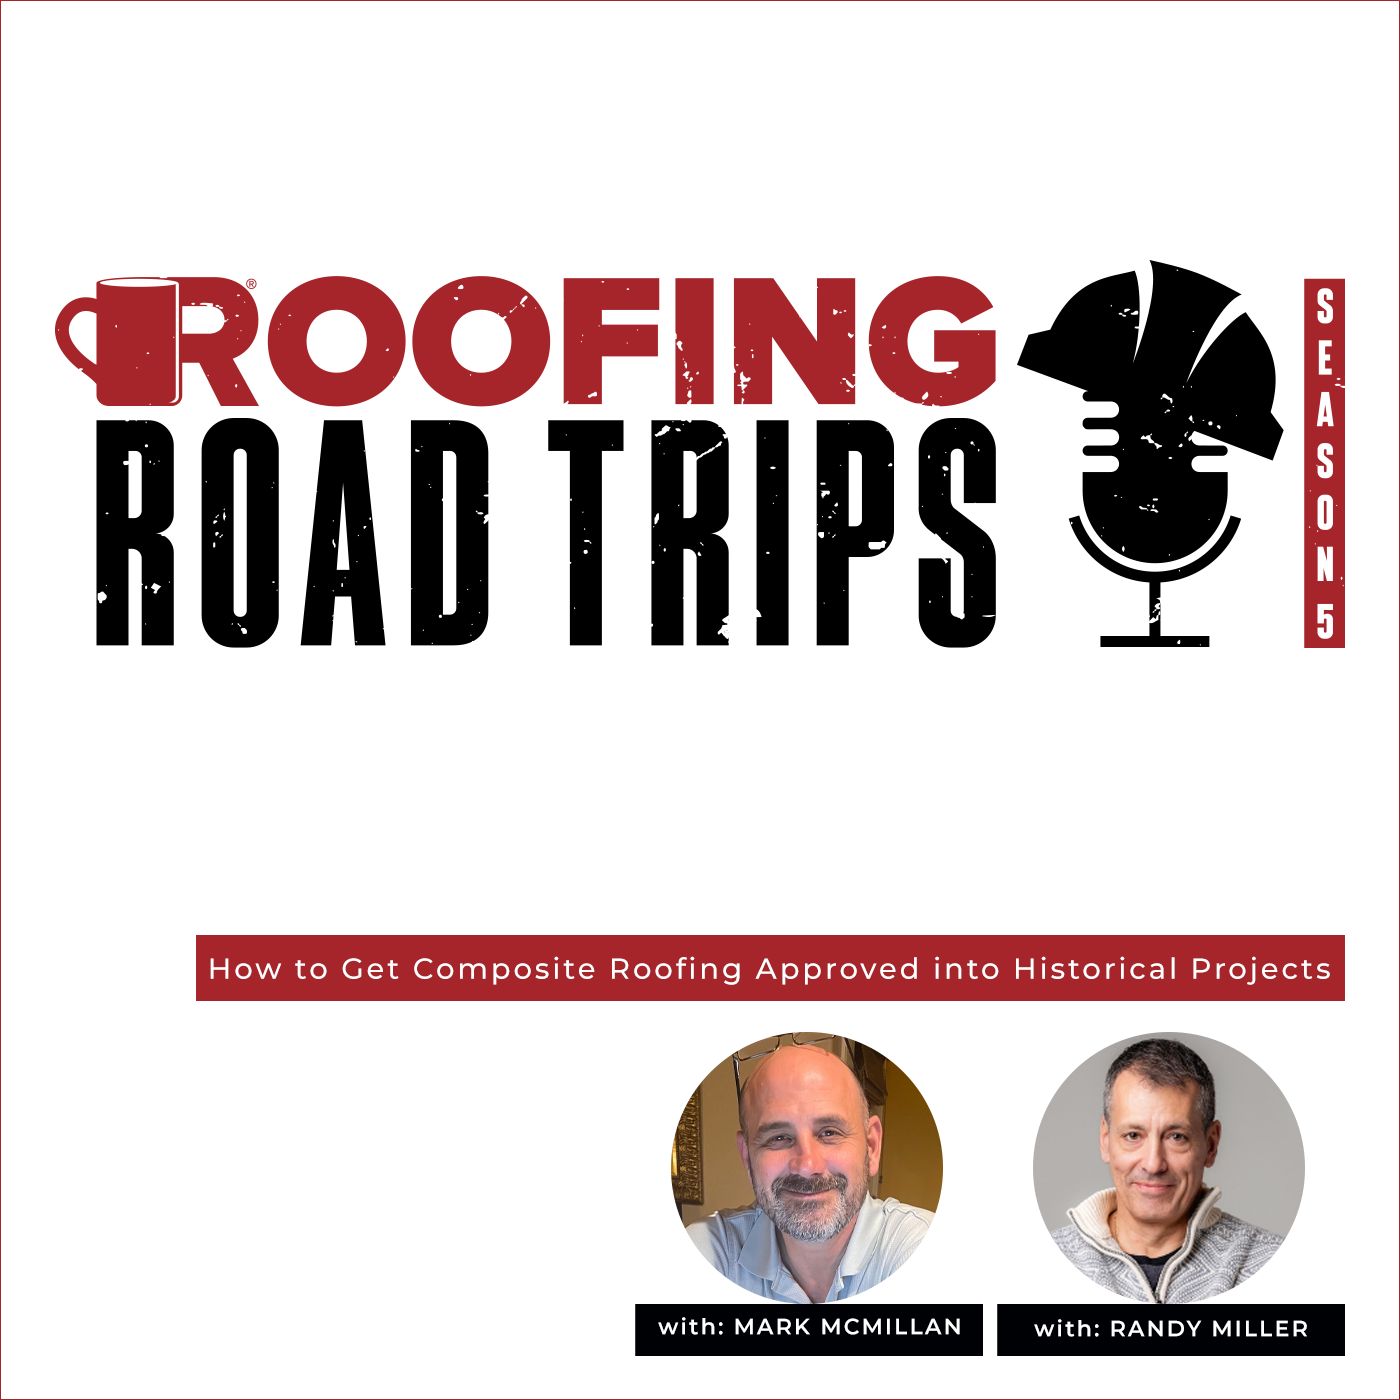 DaVinci Roofscapes - Mark McMillan and Randy Miller - How to get Composite Roofing Approved on Historical Projects